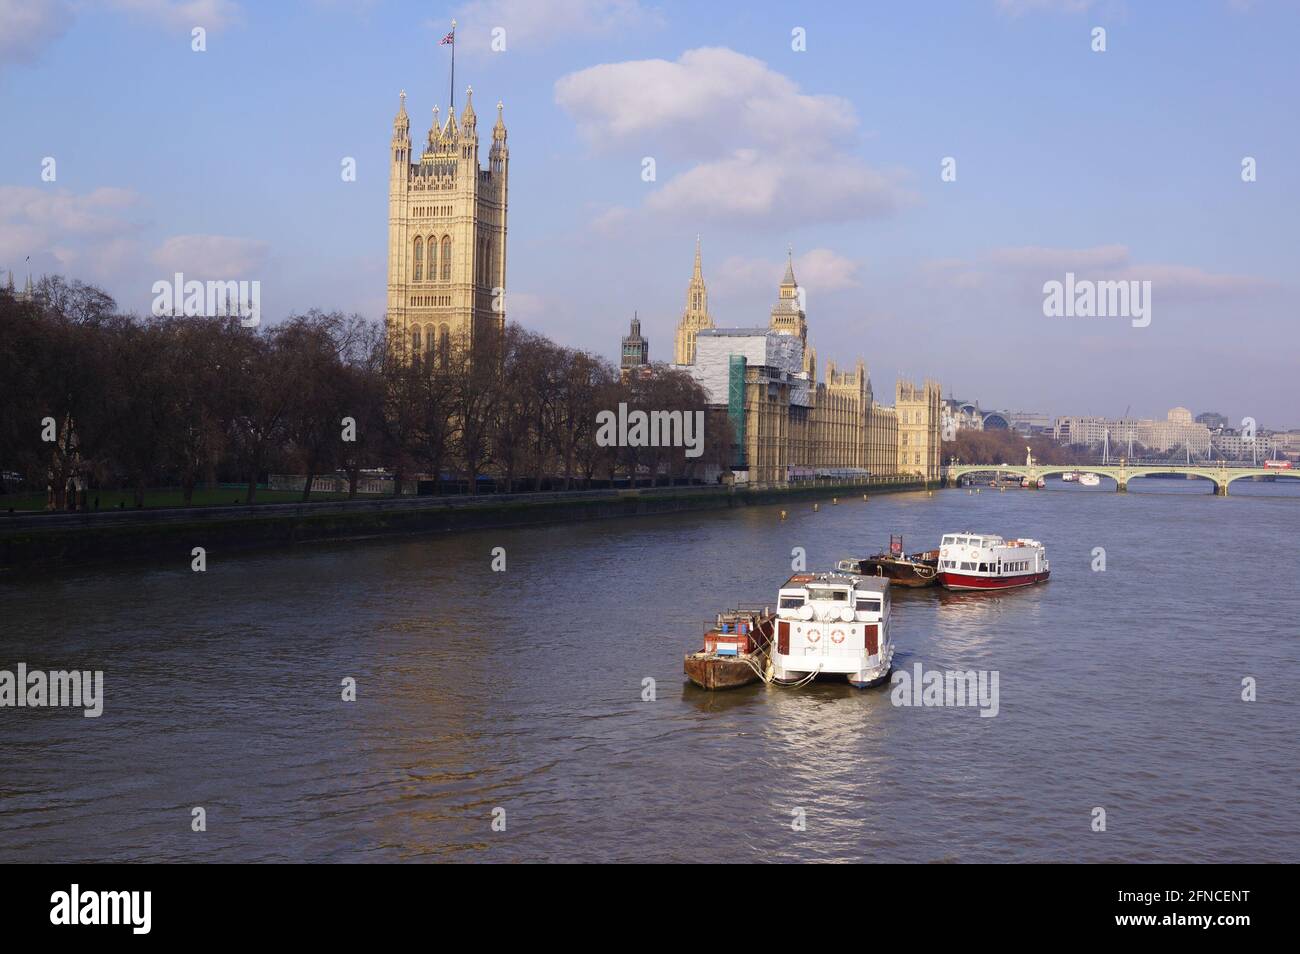 London, UK: boats on the River Thames, with Westminster Palace and Victoria Tower in the background Stock Photo